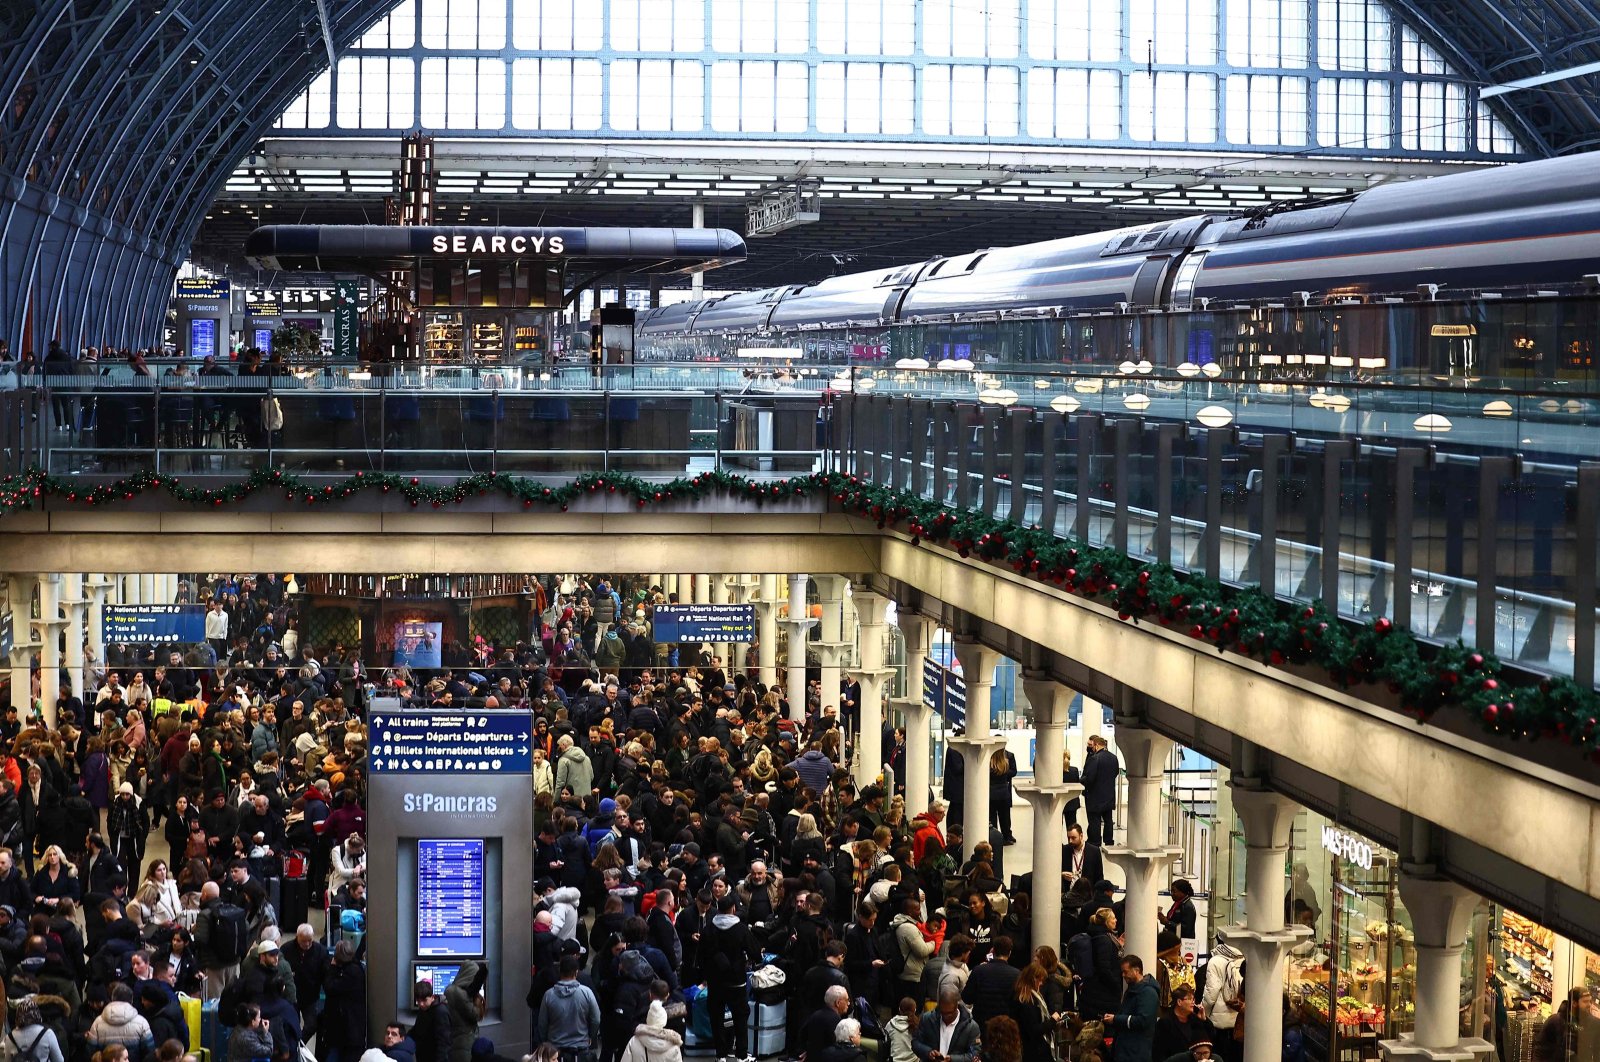 New Year travelers stranded as all Eurostar trains canceled